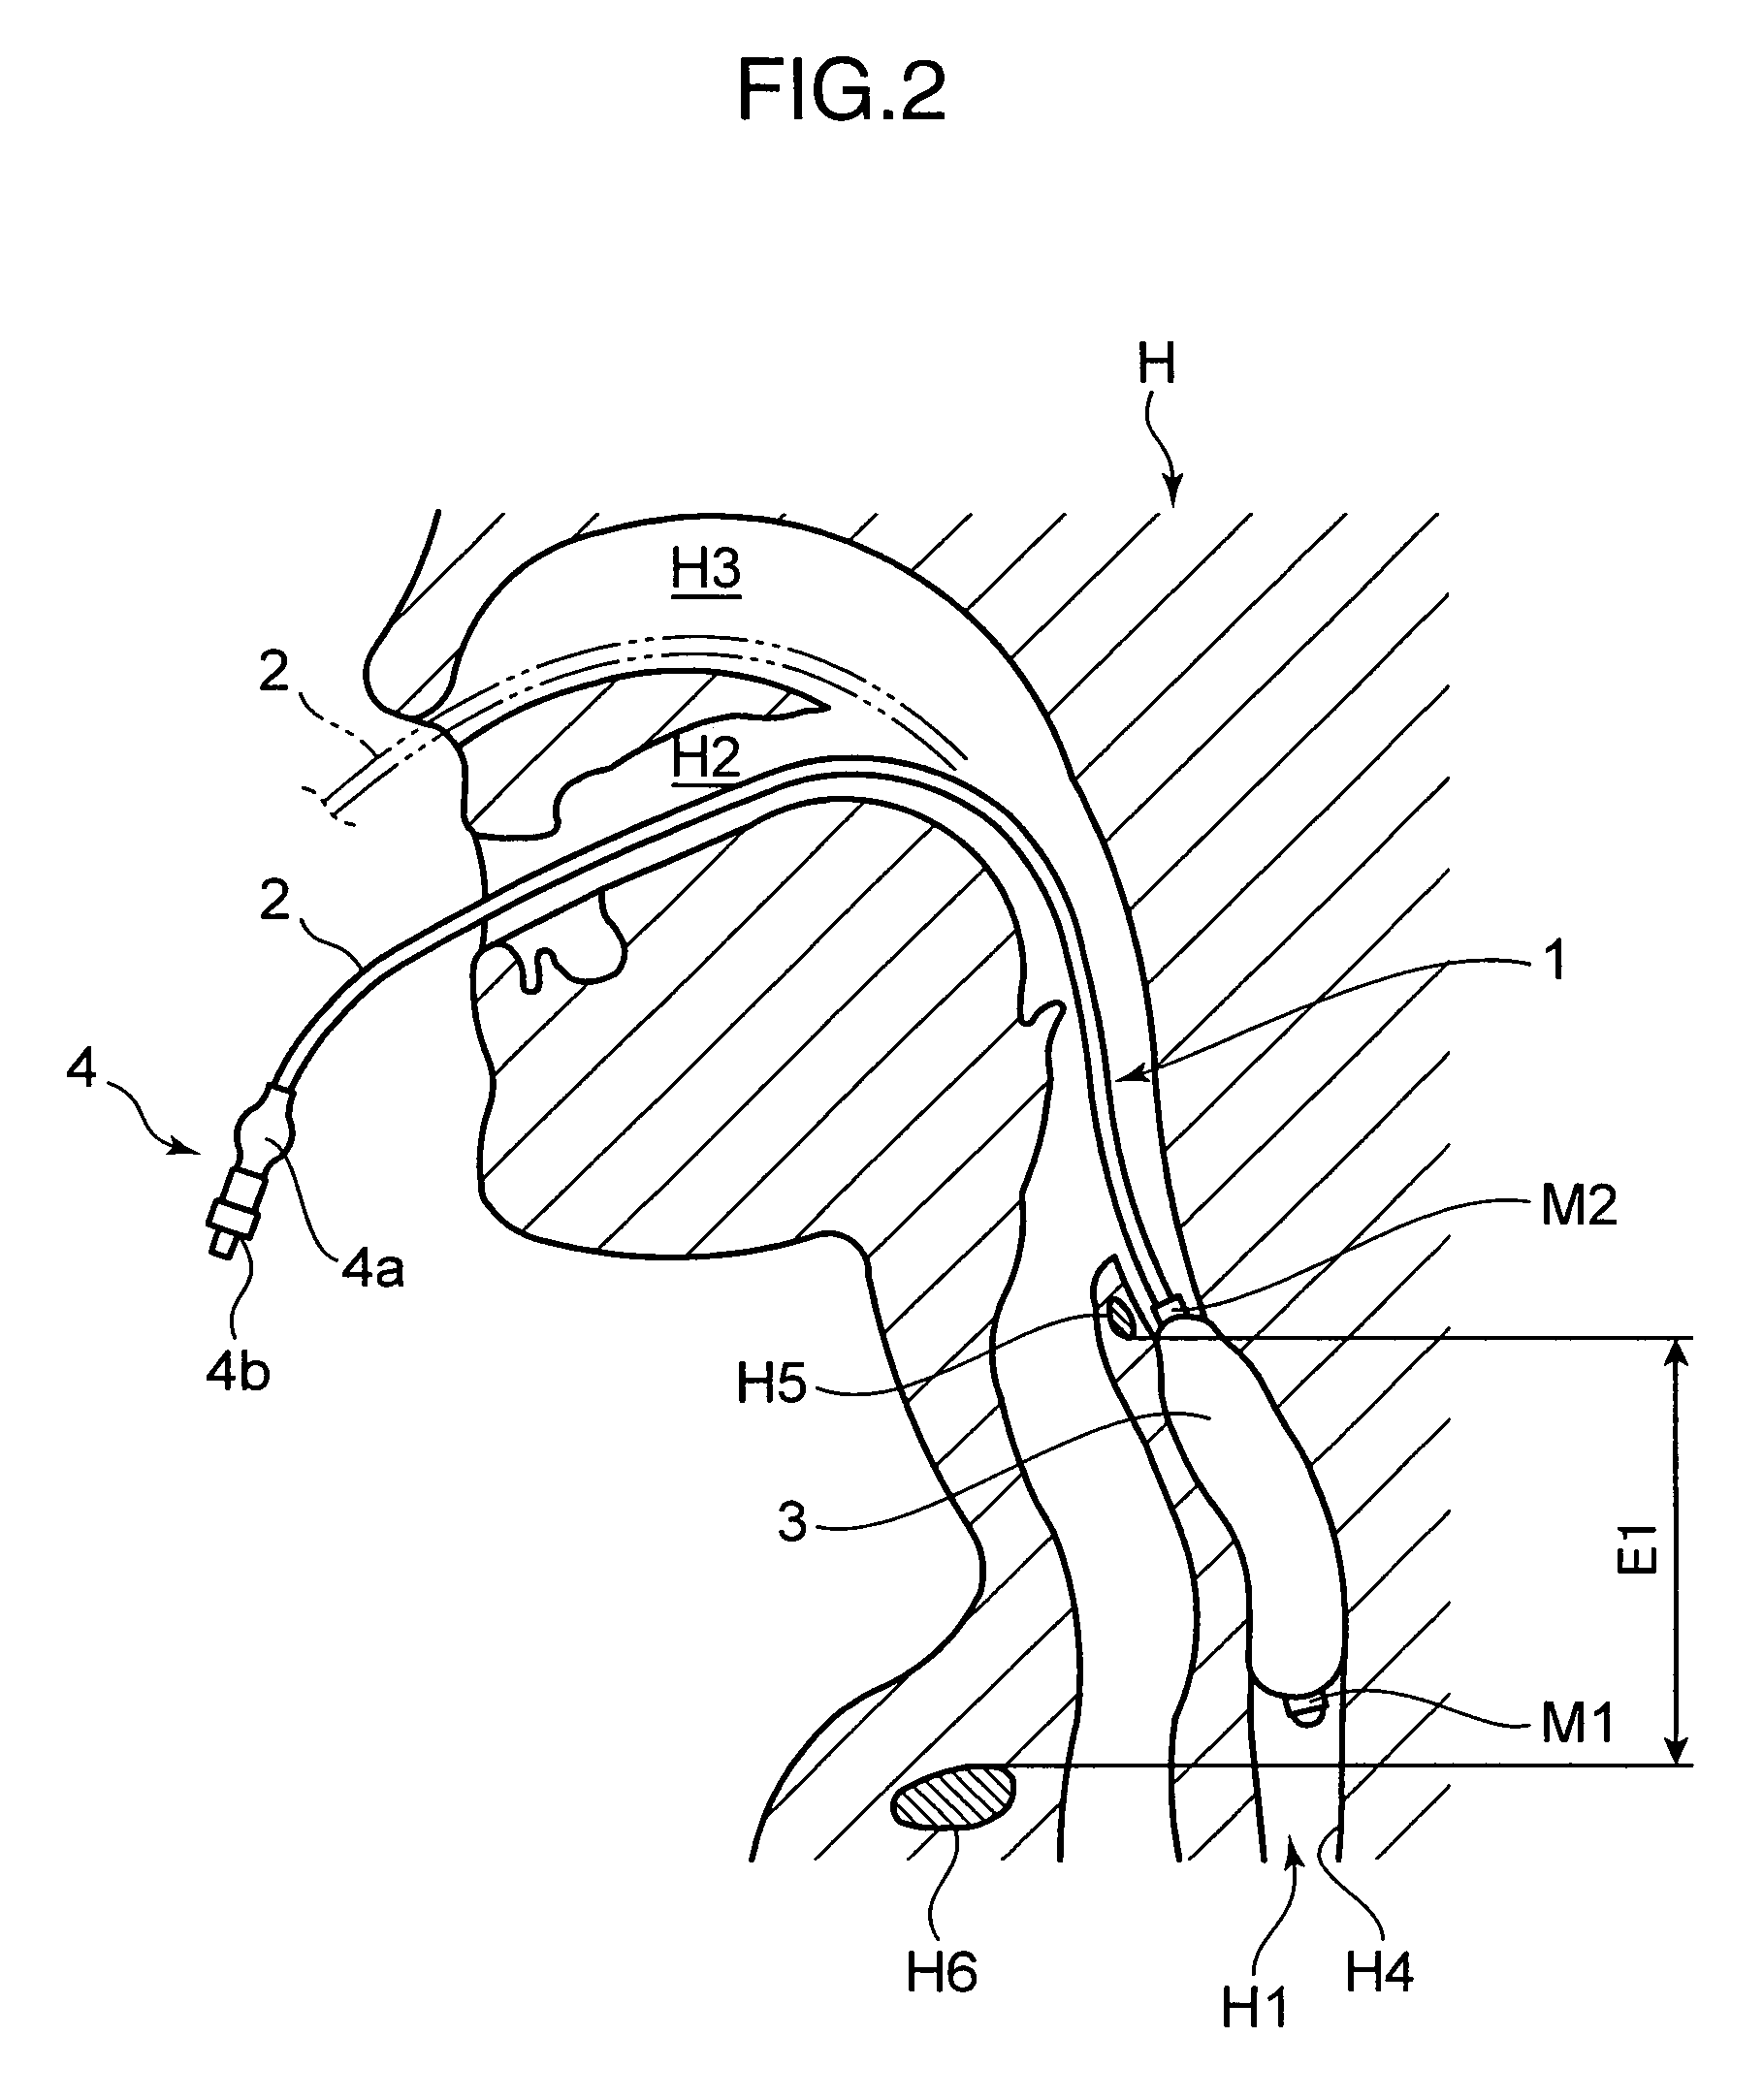 Brain Cooling Device and Brain Cooling System Comprising the Device